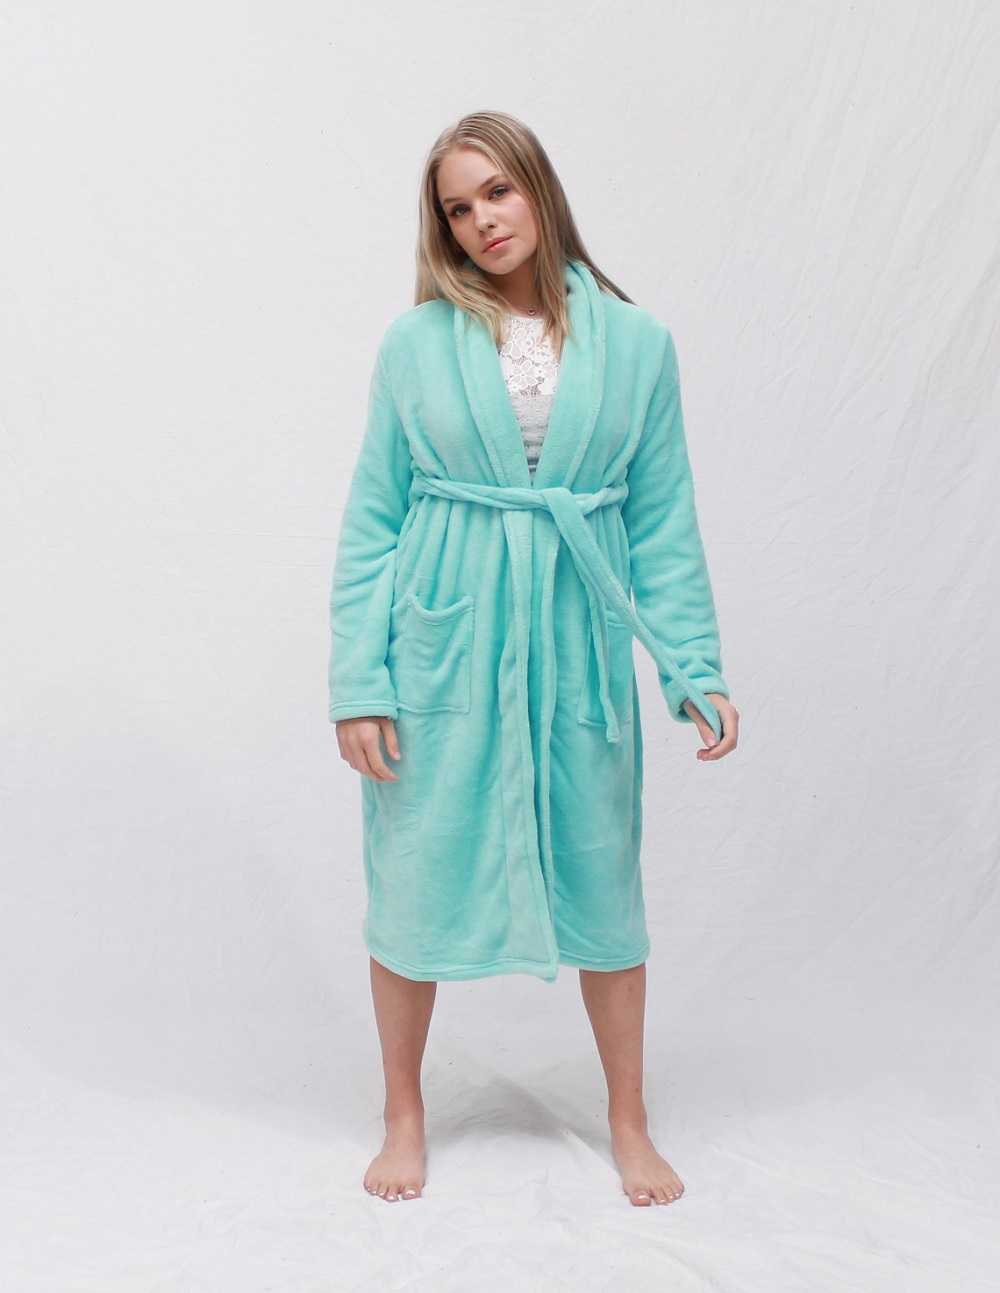 Flannel Hooded Couples Bathrobes Women's Robes Winter Dressing Gowns for  Women Men Female Nightgowns Kimono Robe Home Clothes | Wish